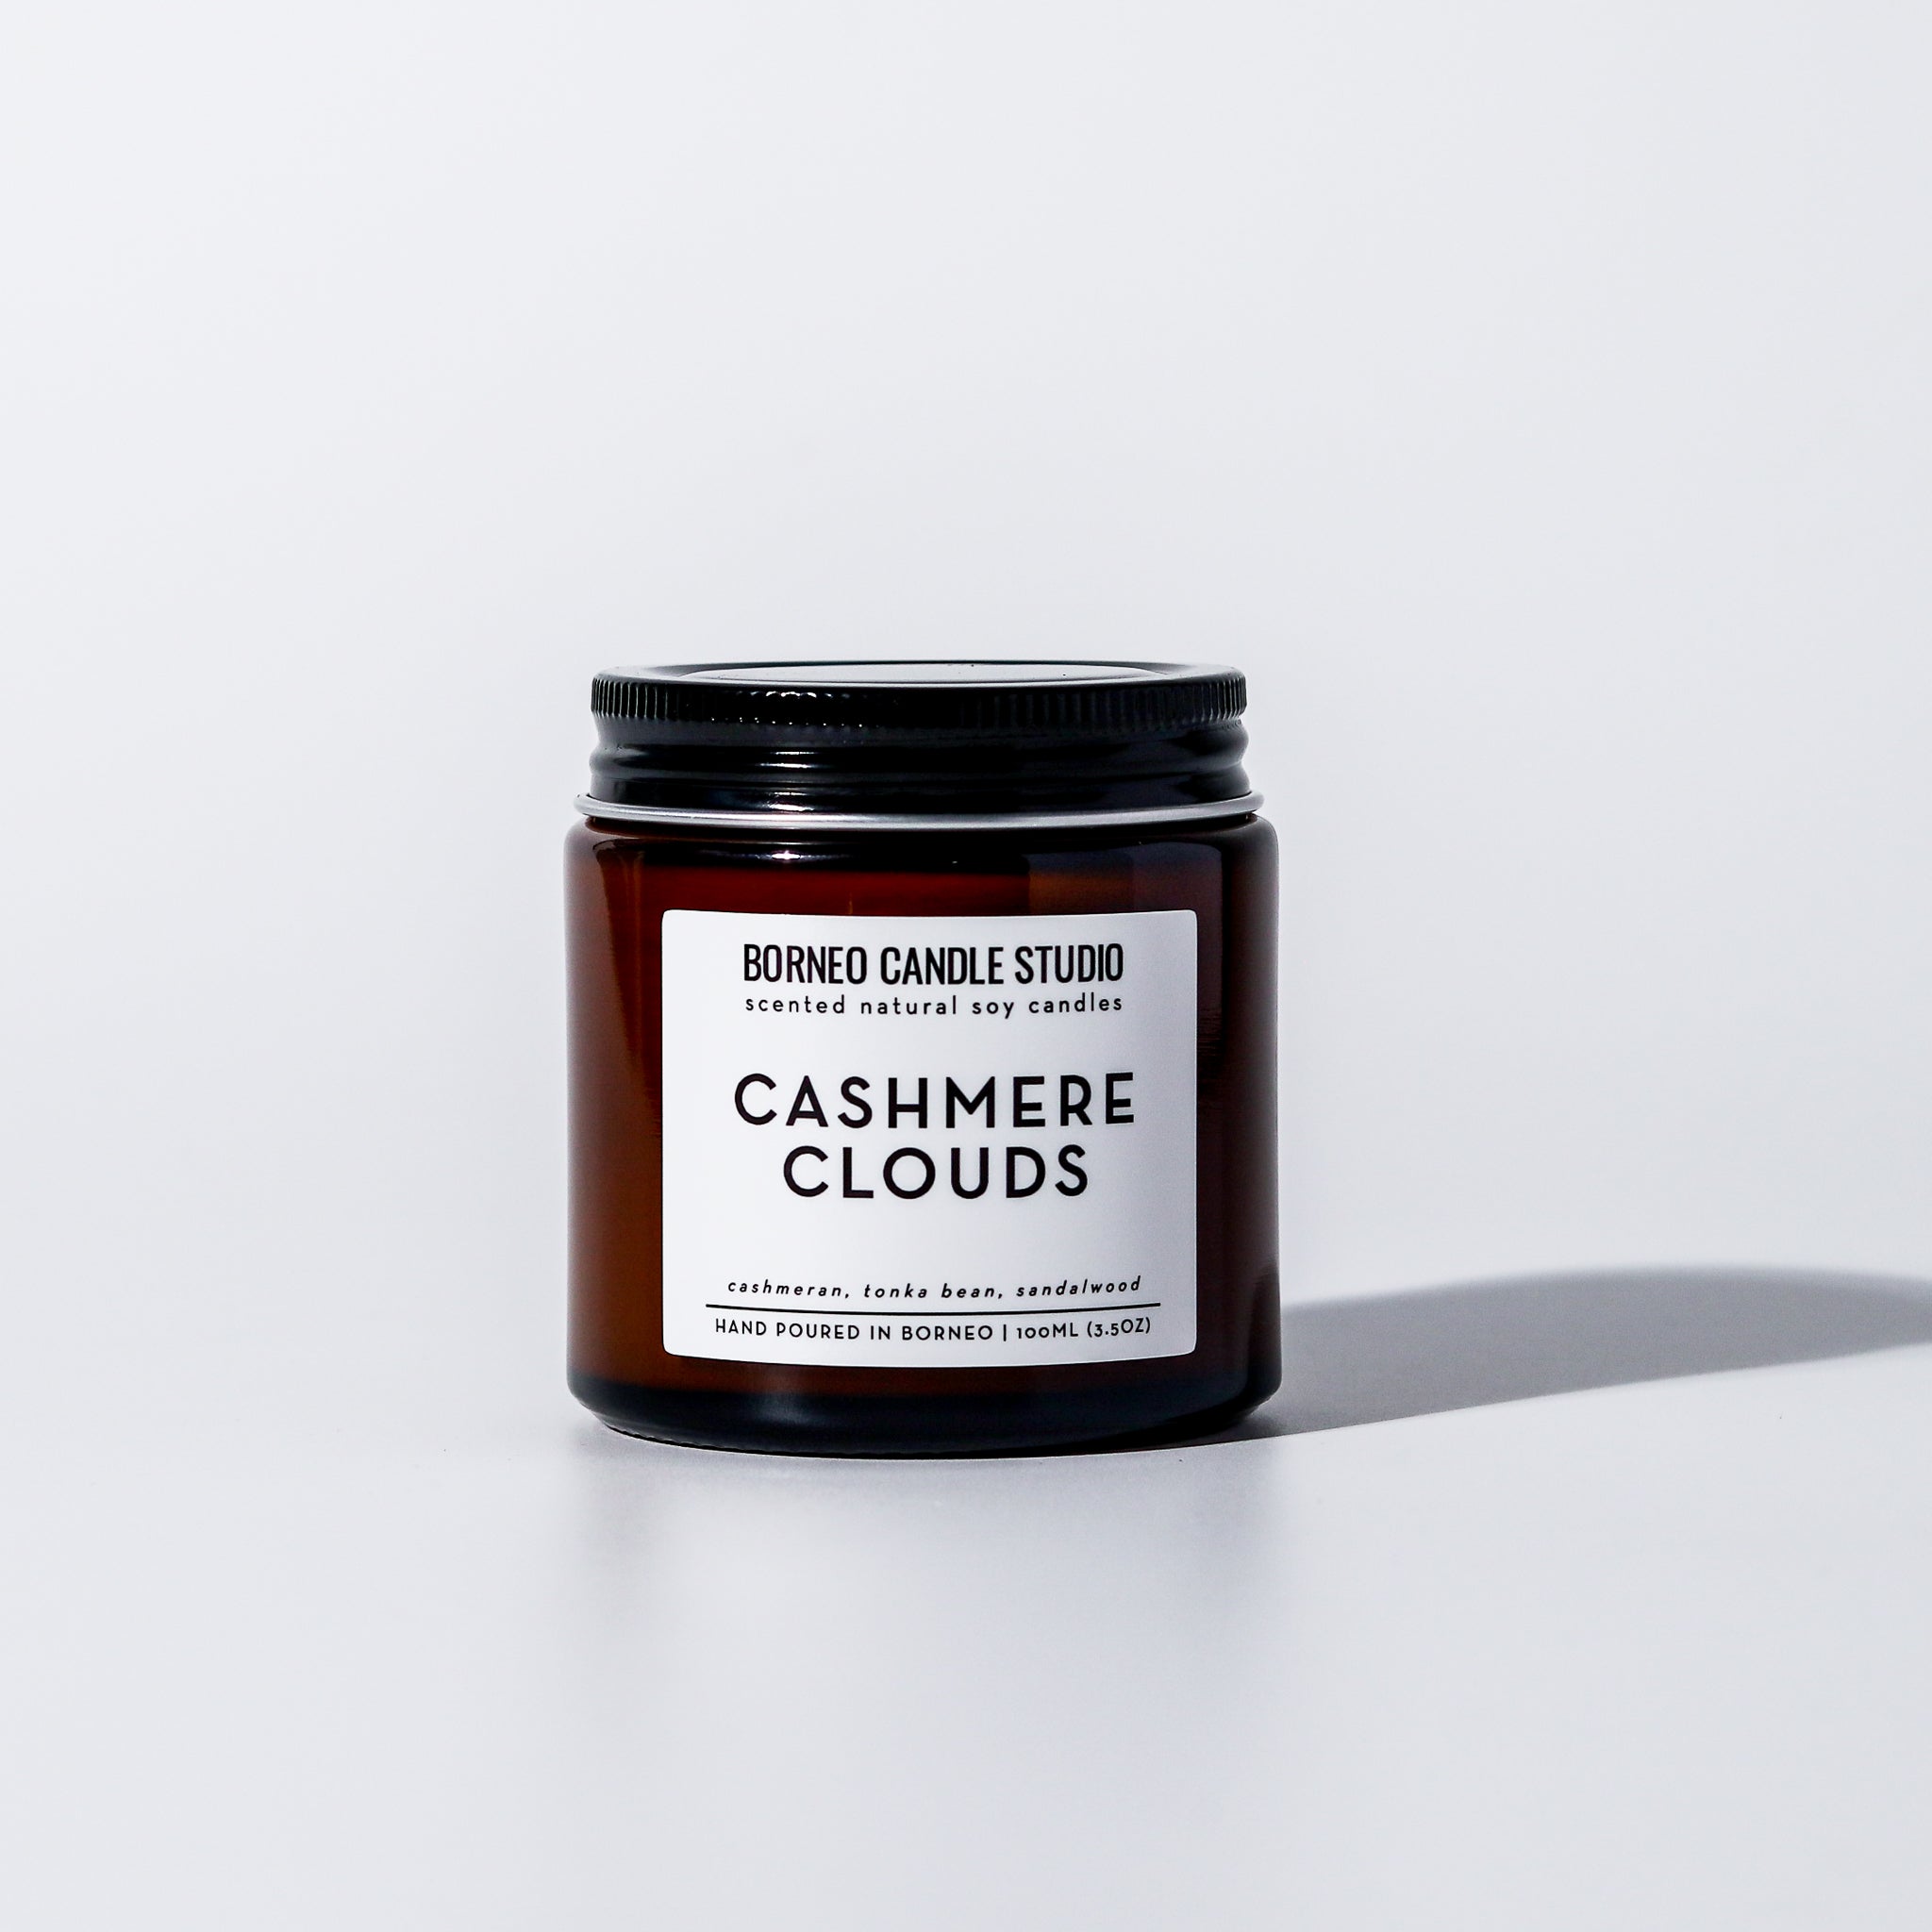 Cashmere Clouds Scented Candle - cashmere, tonka bean, sandalwood scented candle in 3.5 oz amber glass jar with lid